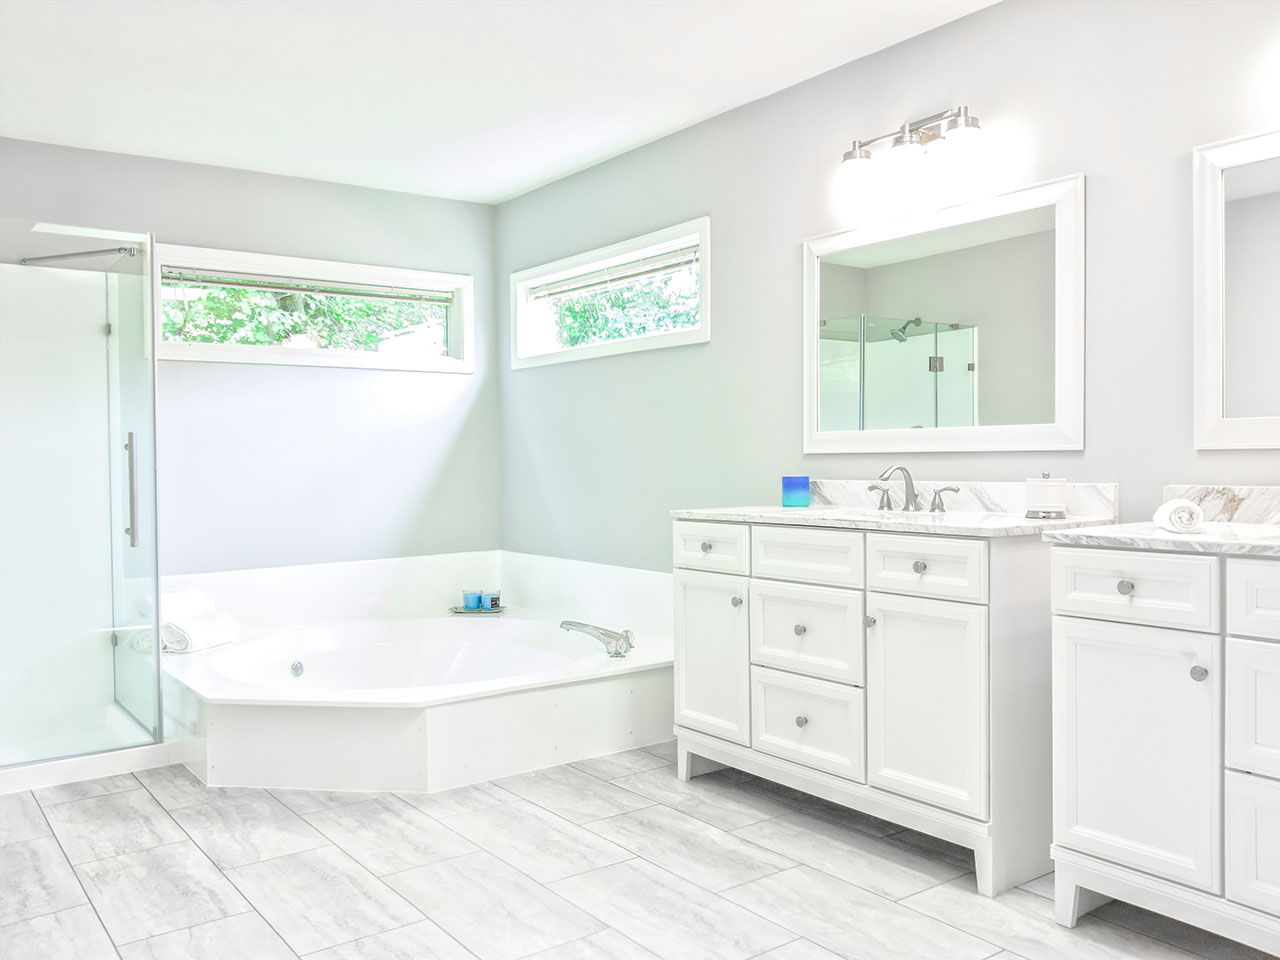 Image of a white bathroom